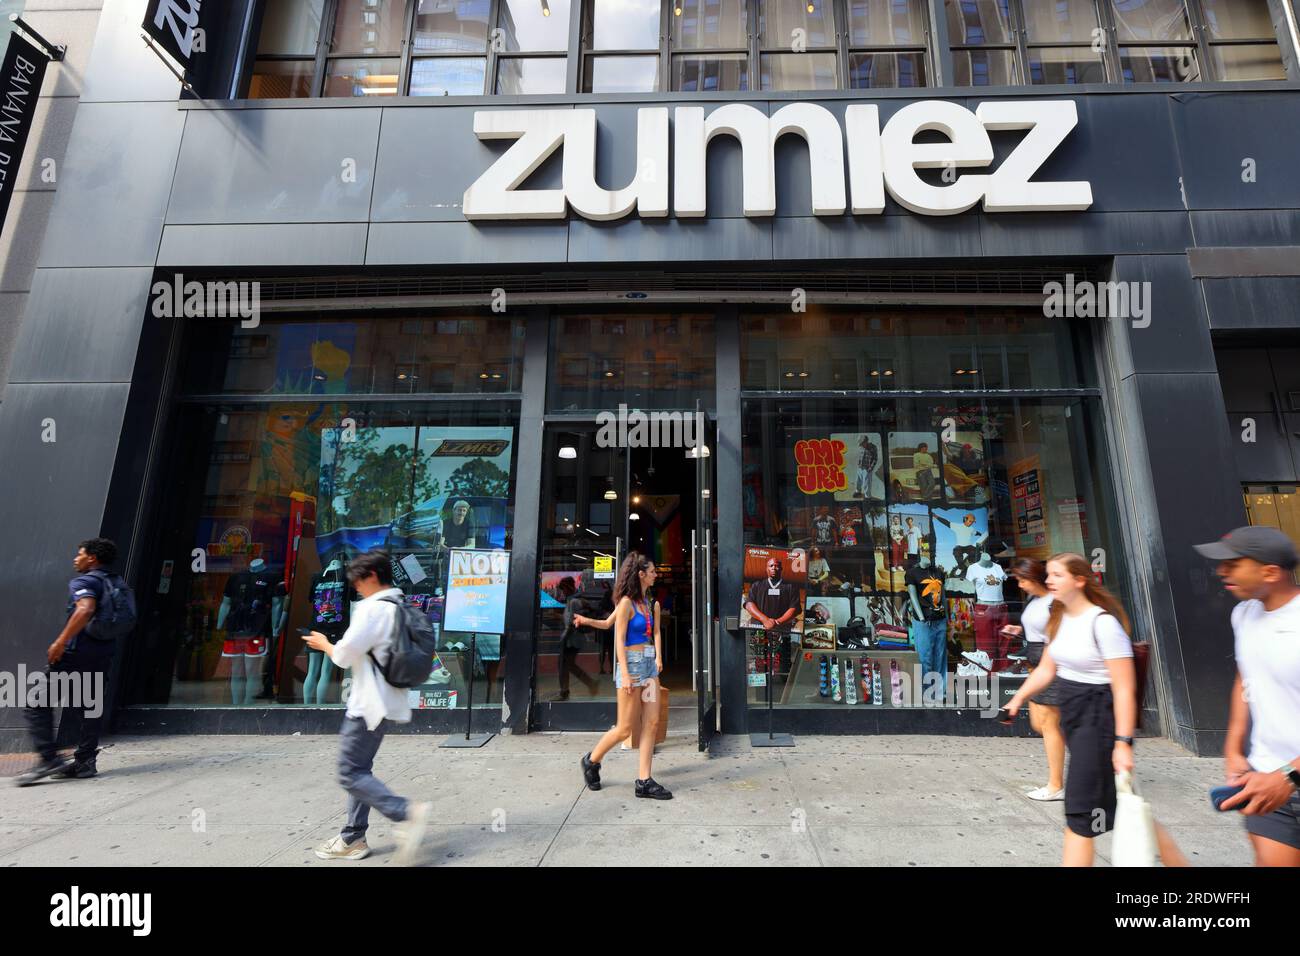 Zumiez, 15 W 34th St., New York, NYC storefront photo of a clothing store in Midtown Manhattan. Stock Photo